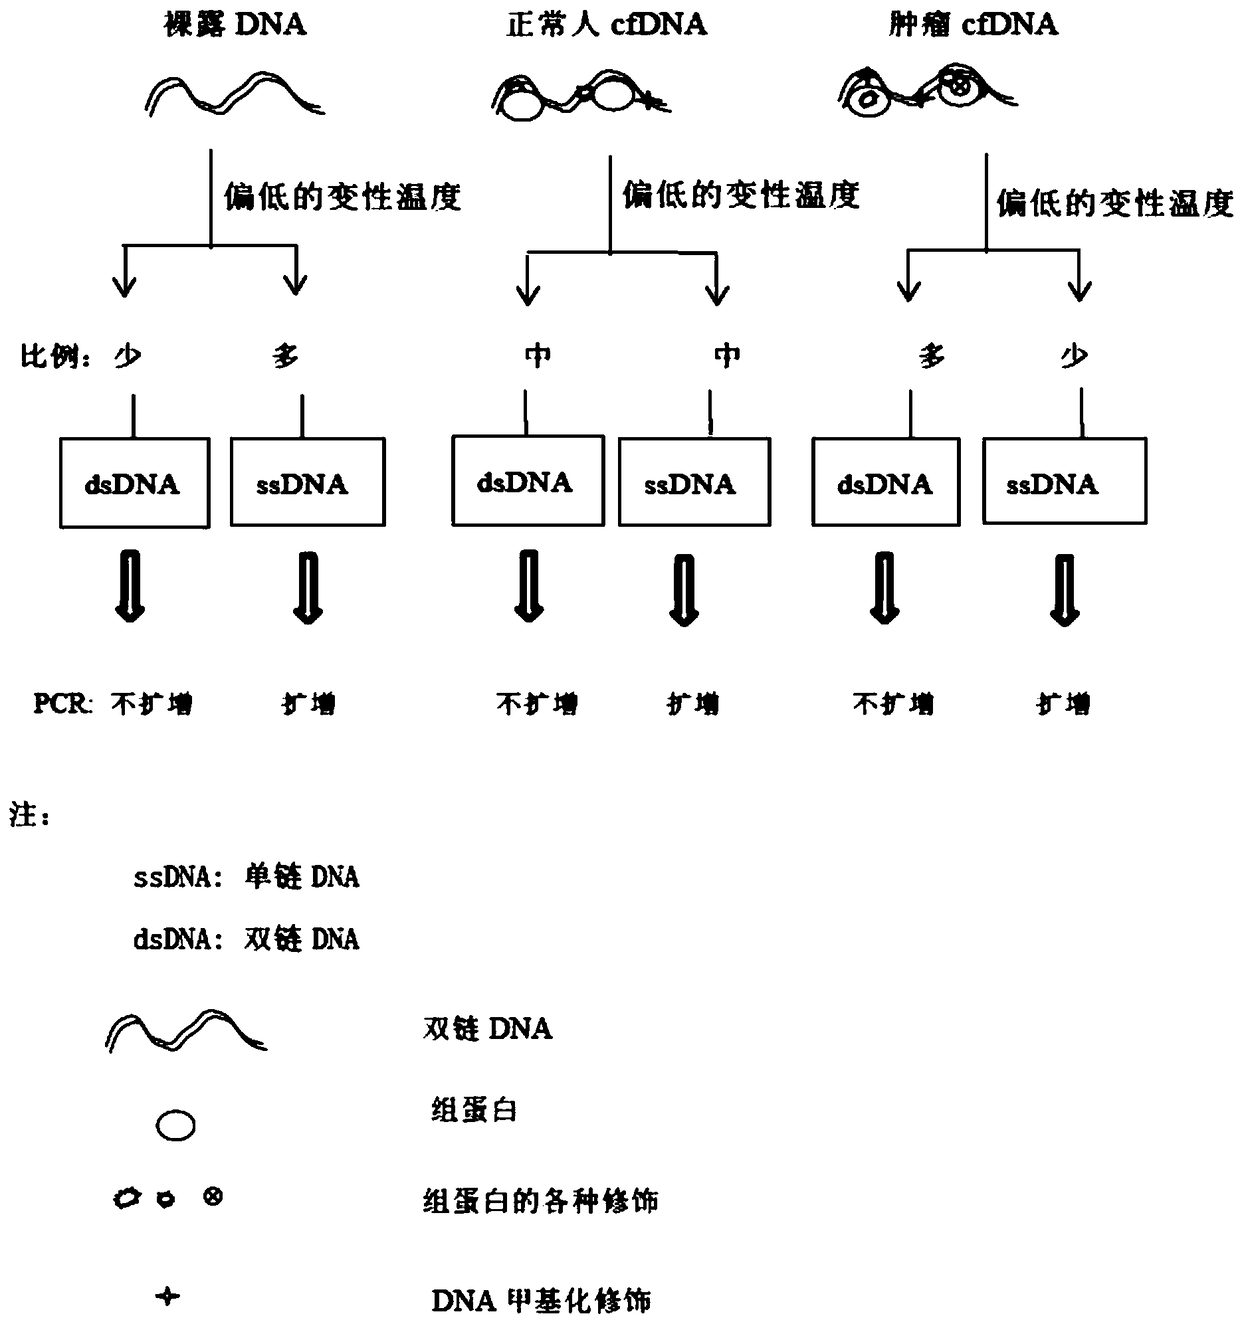 Primer pair group for detecting modification difference of cytosine deaminase and related molecular gene in cfDNA and kit